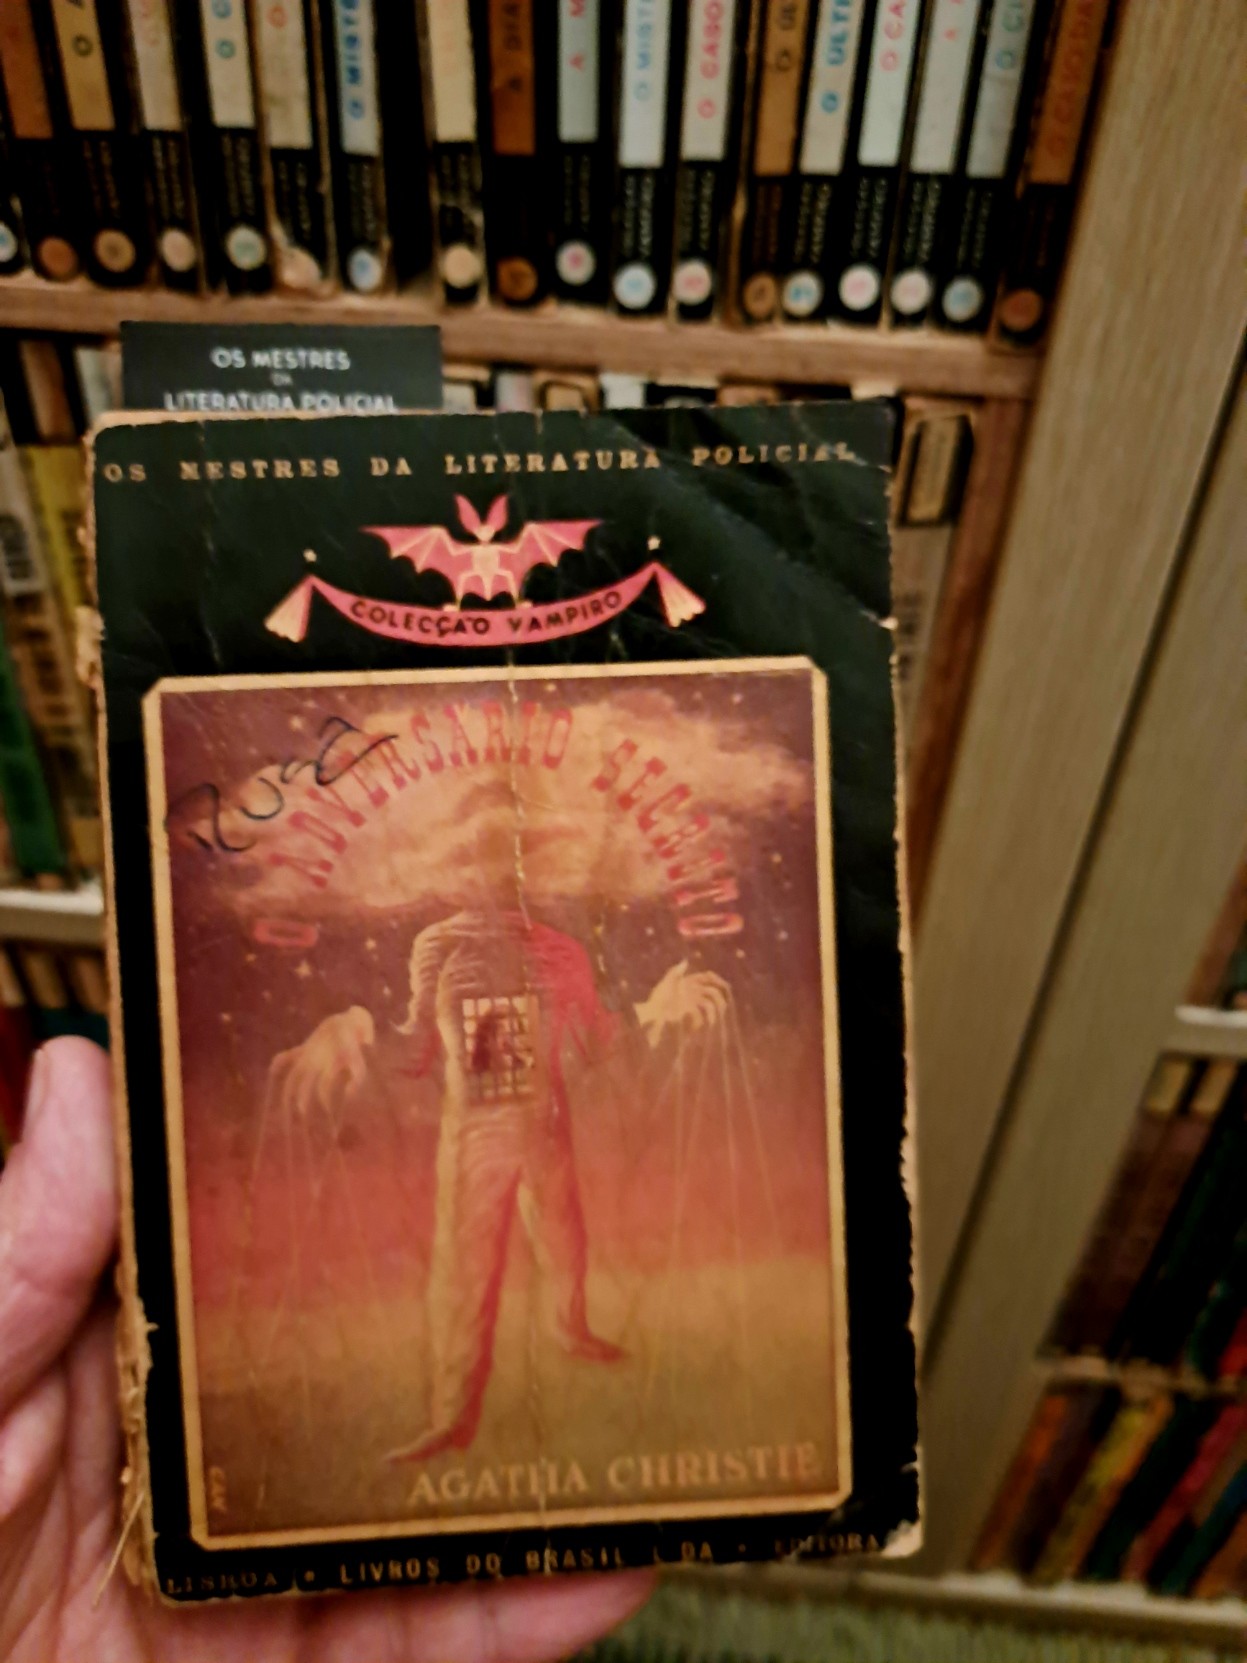 A picture of Agatha Christie's "The Secret Adversary" in its Portuguese edition on Colecção Vampiro. The series' tag line "Os mestres da literatura policial" can be read on the book cover and also the bookmark on it. On the background, a bookshelf full of books of the same collection.